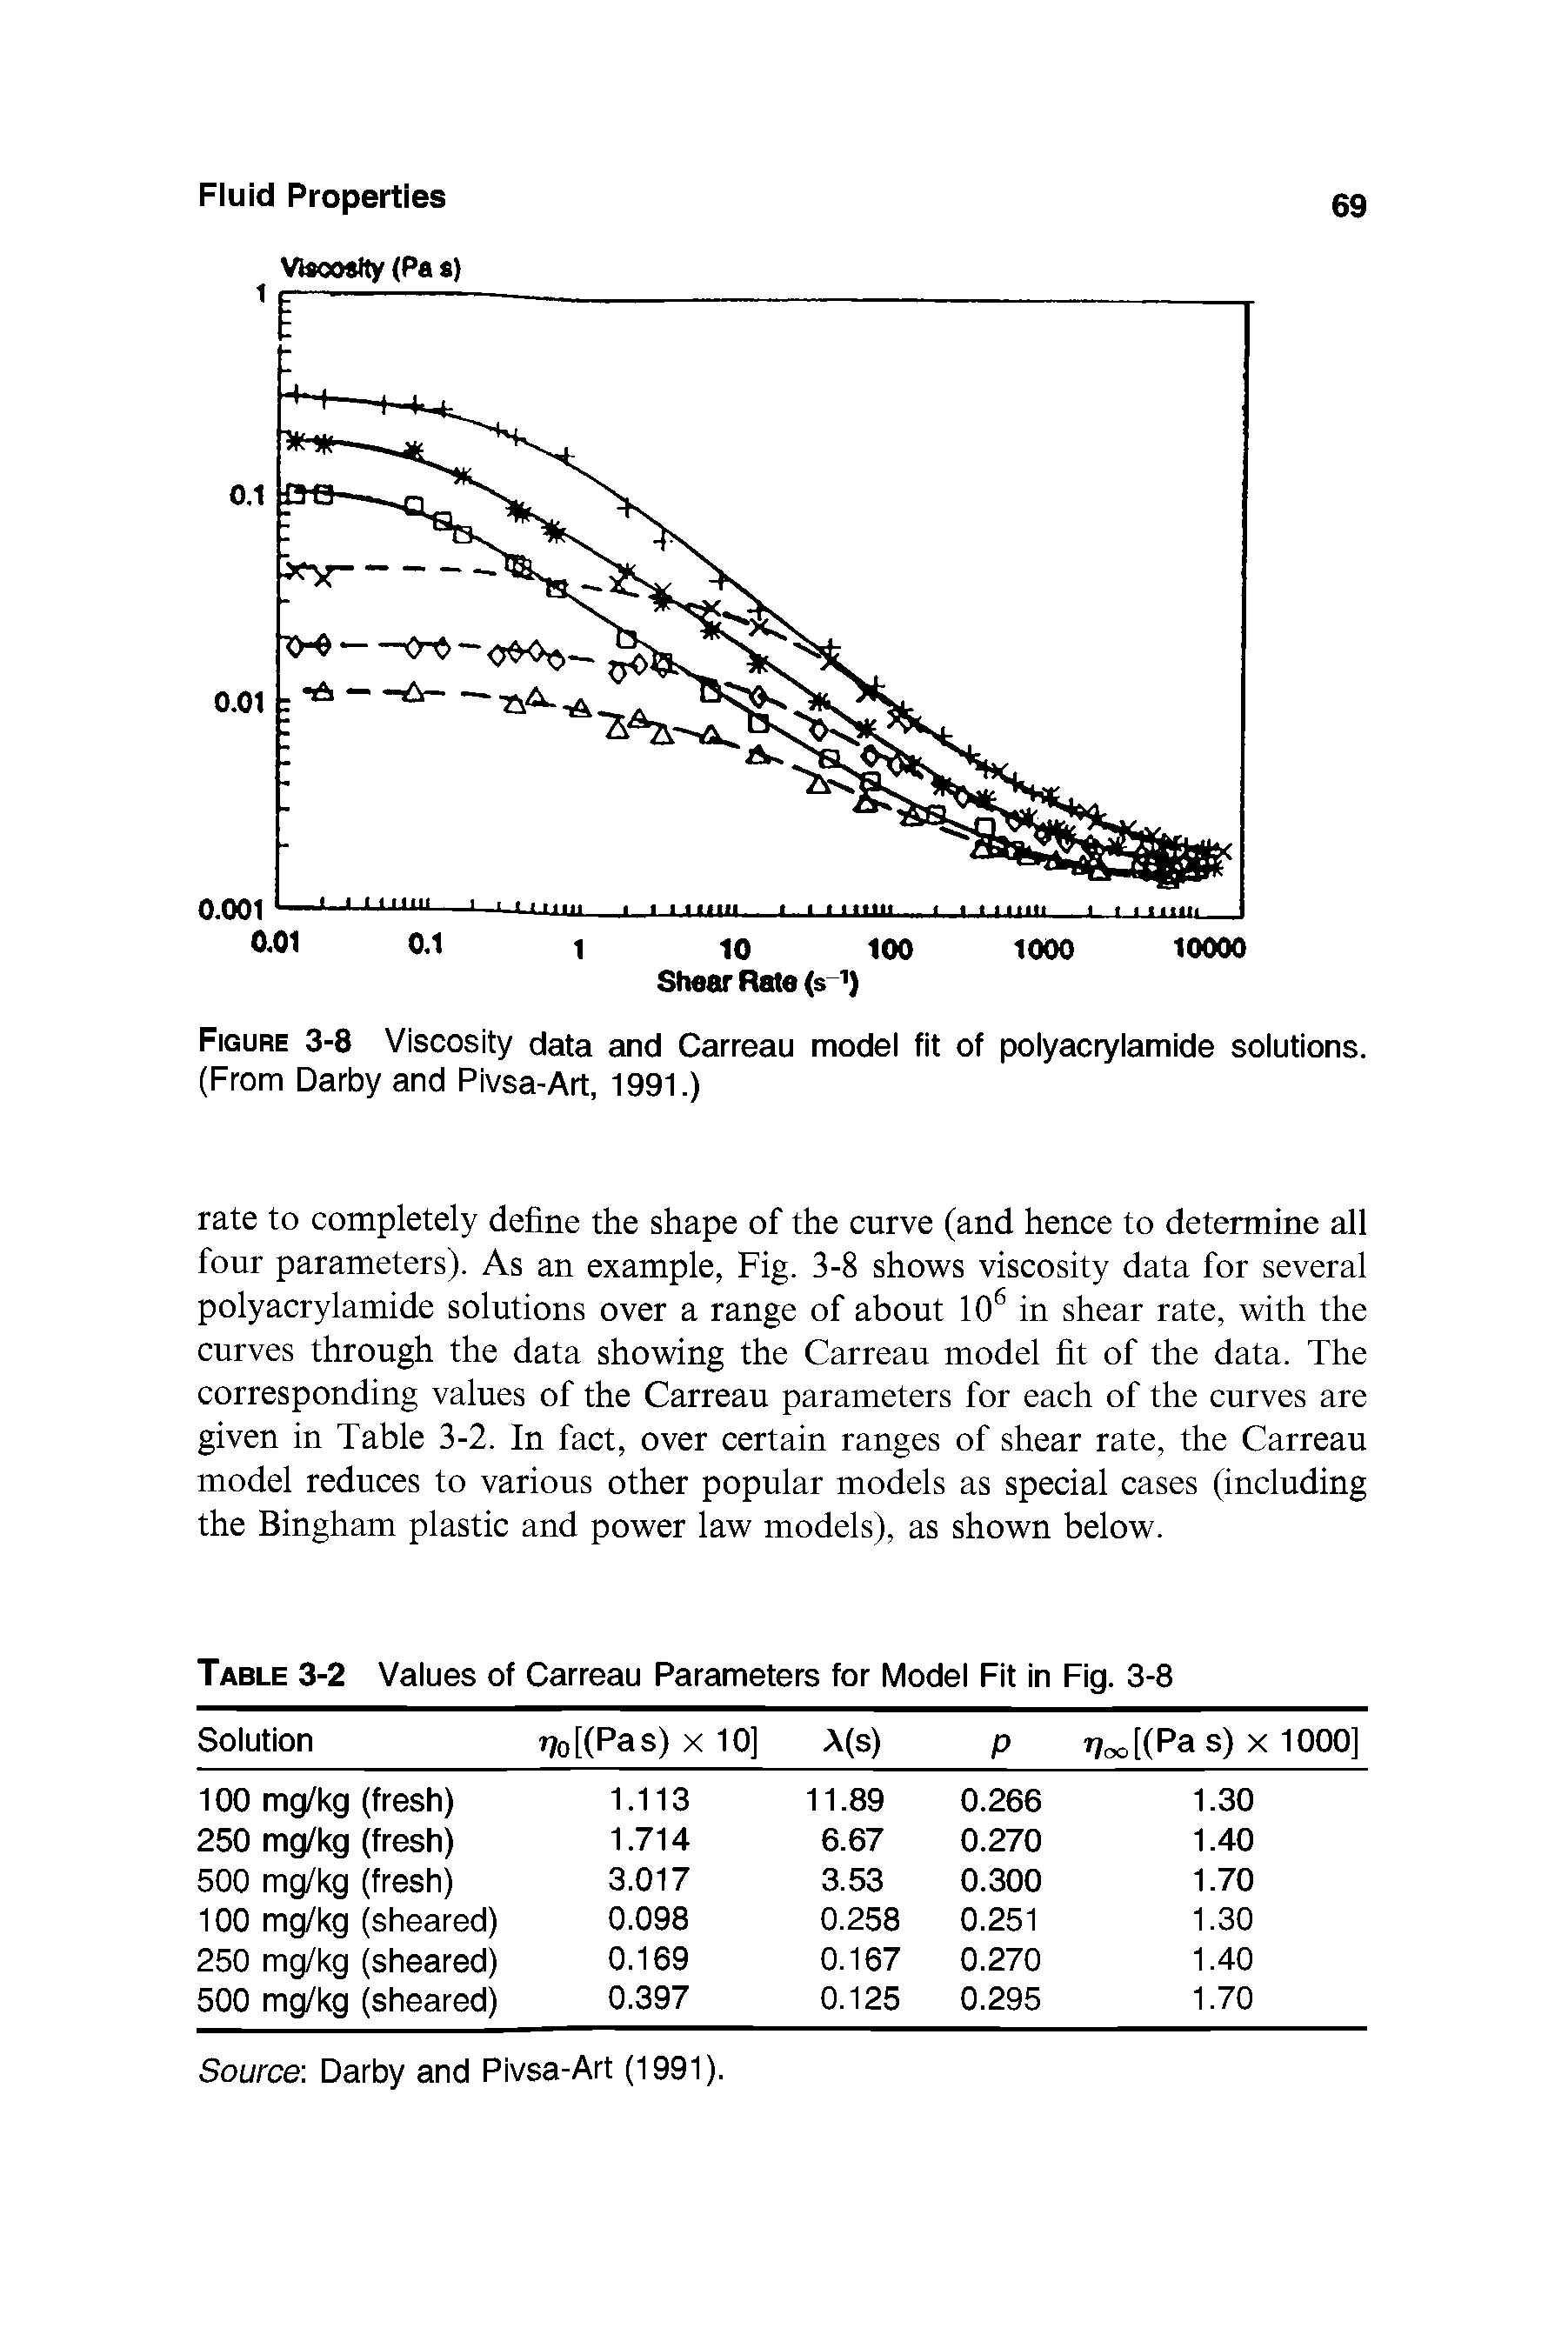 Figure 3-8 Viscosity data and Carreau model fit of polyacrylamide solutions. (From Darby and Pivsa-Art, 1991.)...